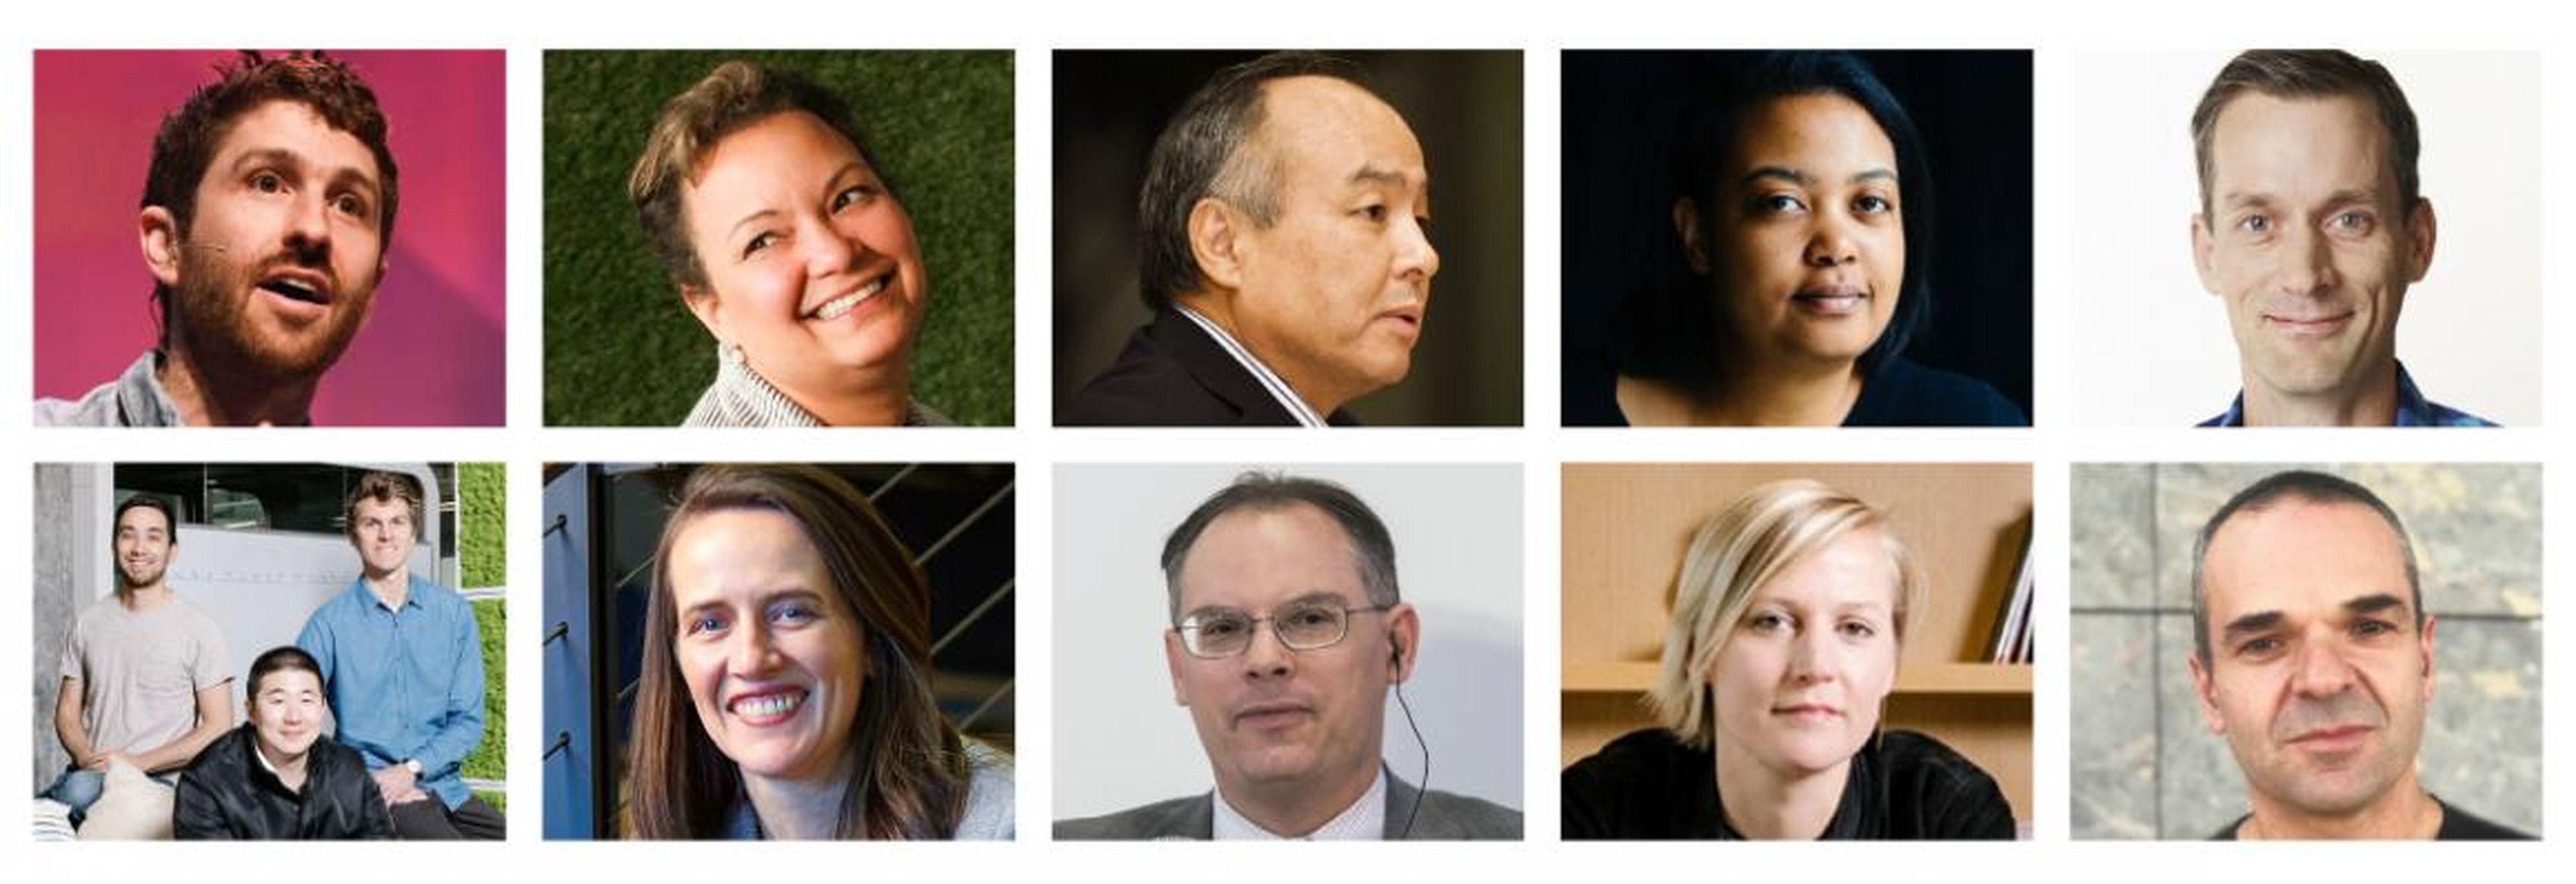 INTRODUCING: The 10 people transforming how the world interacts with technology